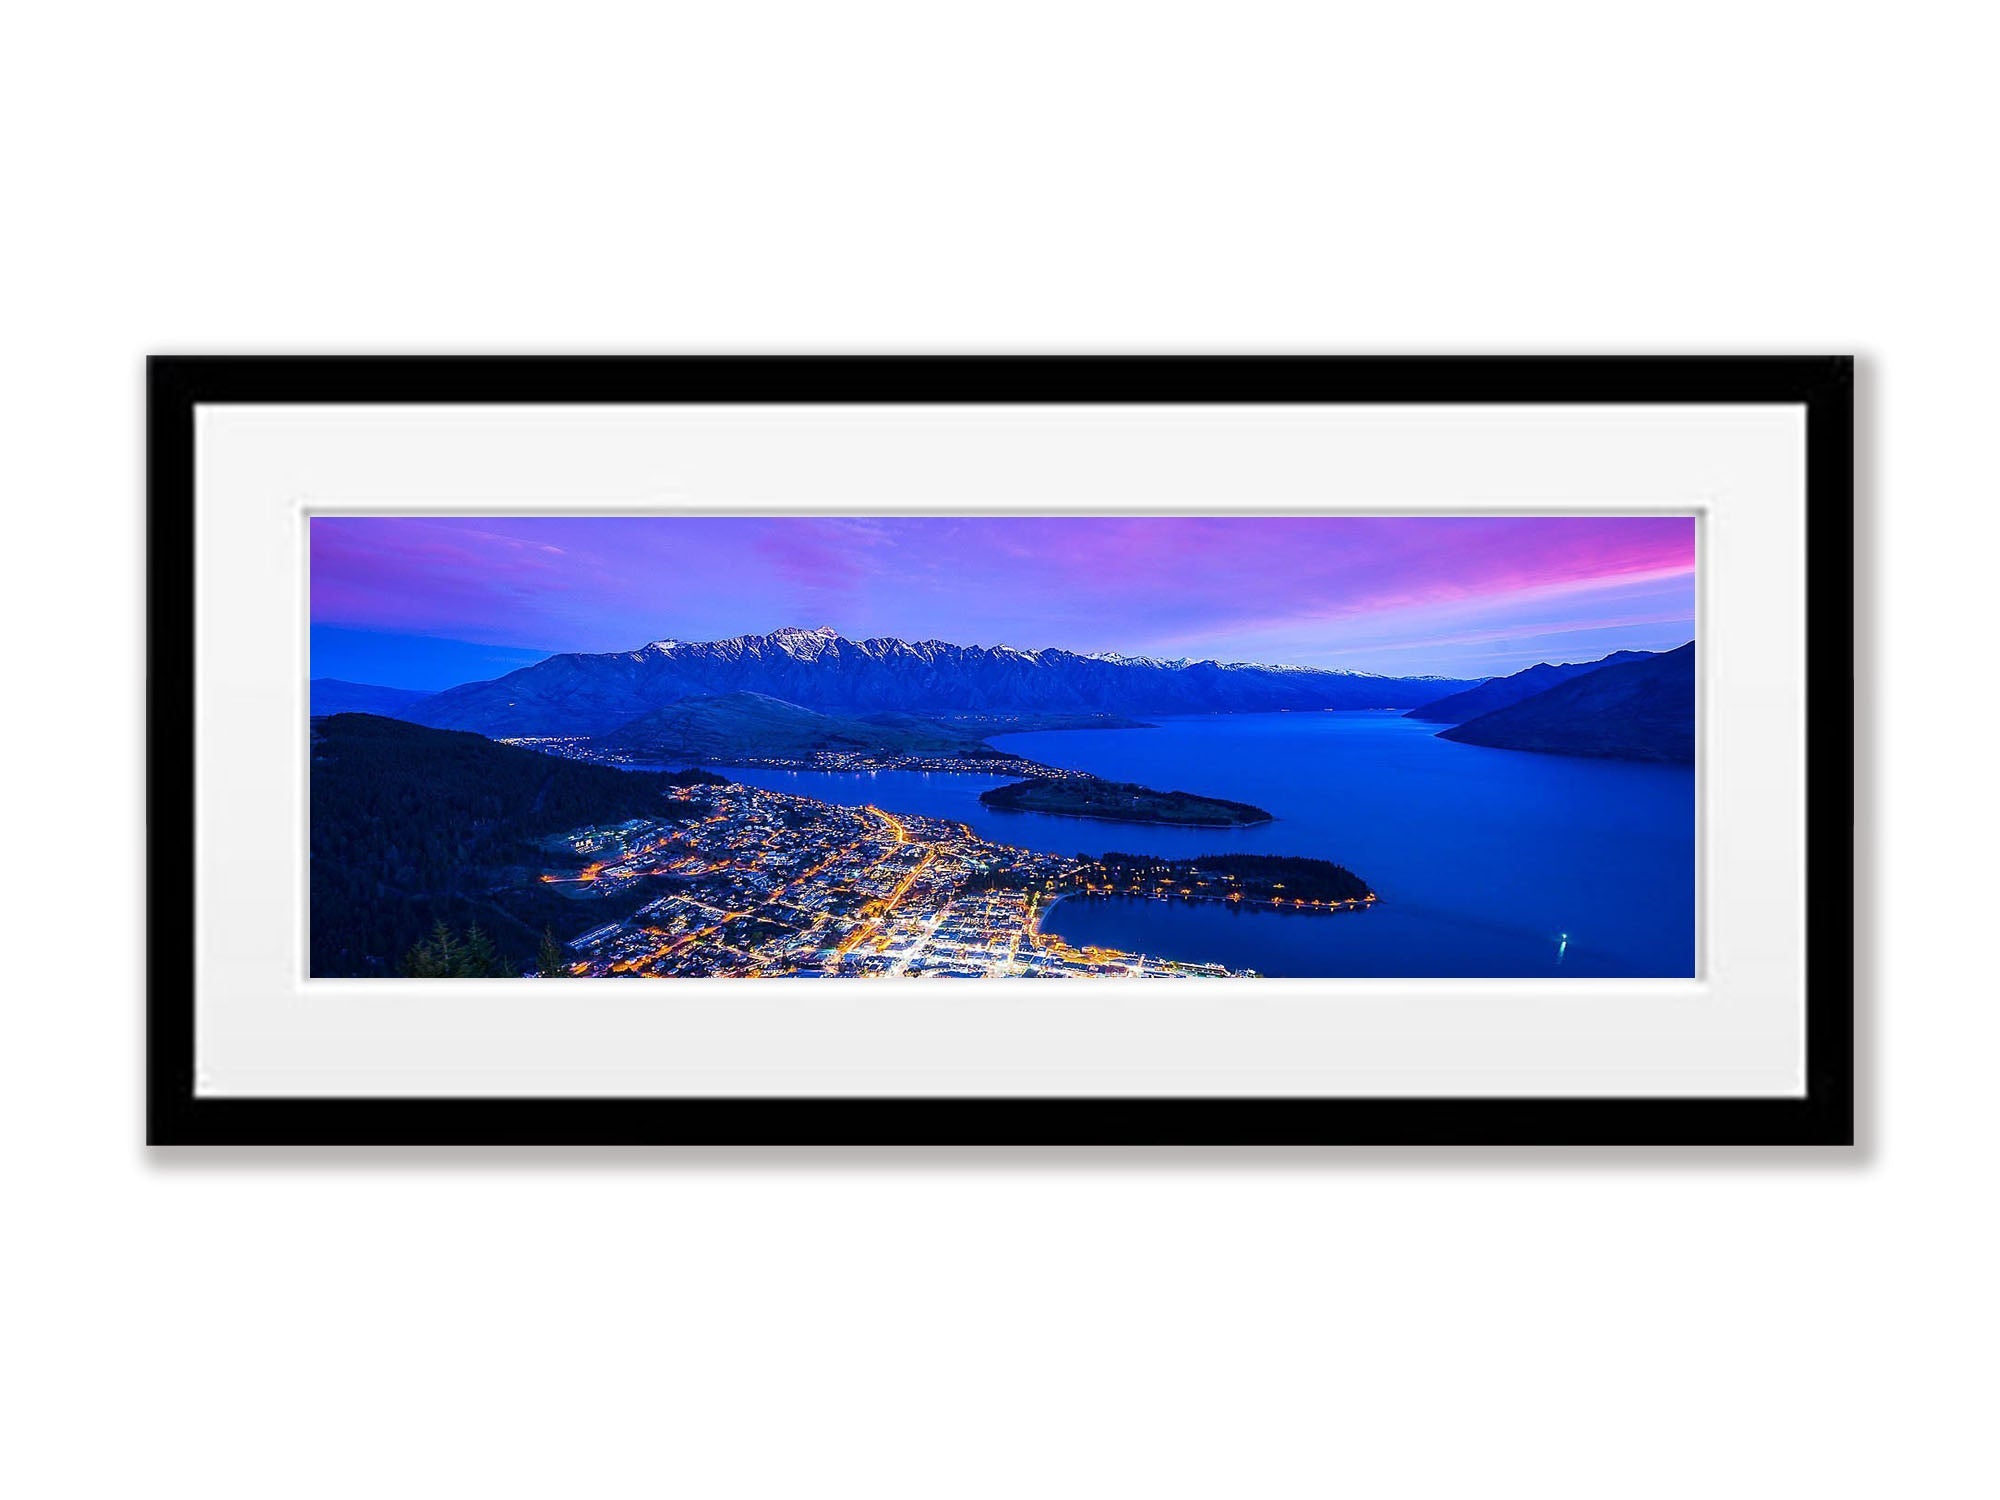 Queenstown and The Remarkables at night panorama, New Zealand